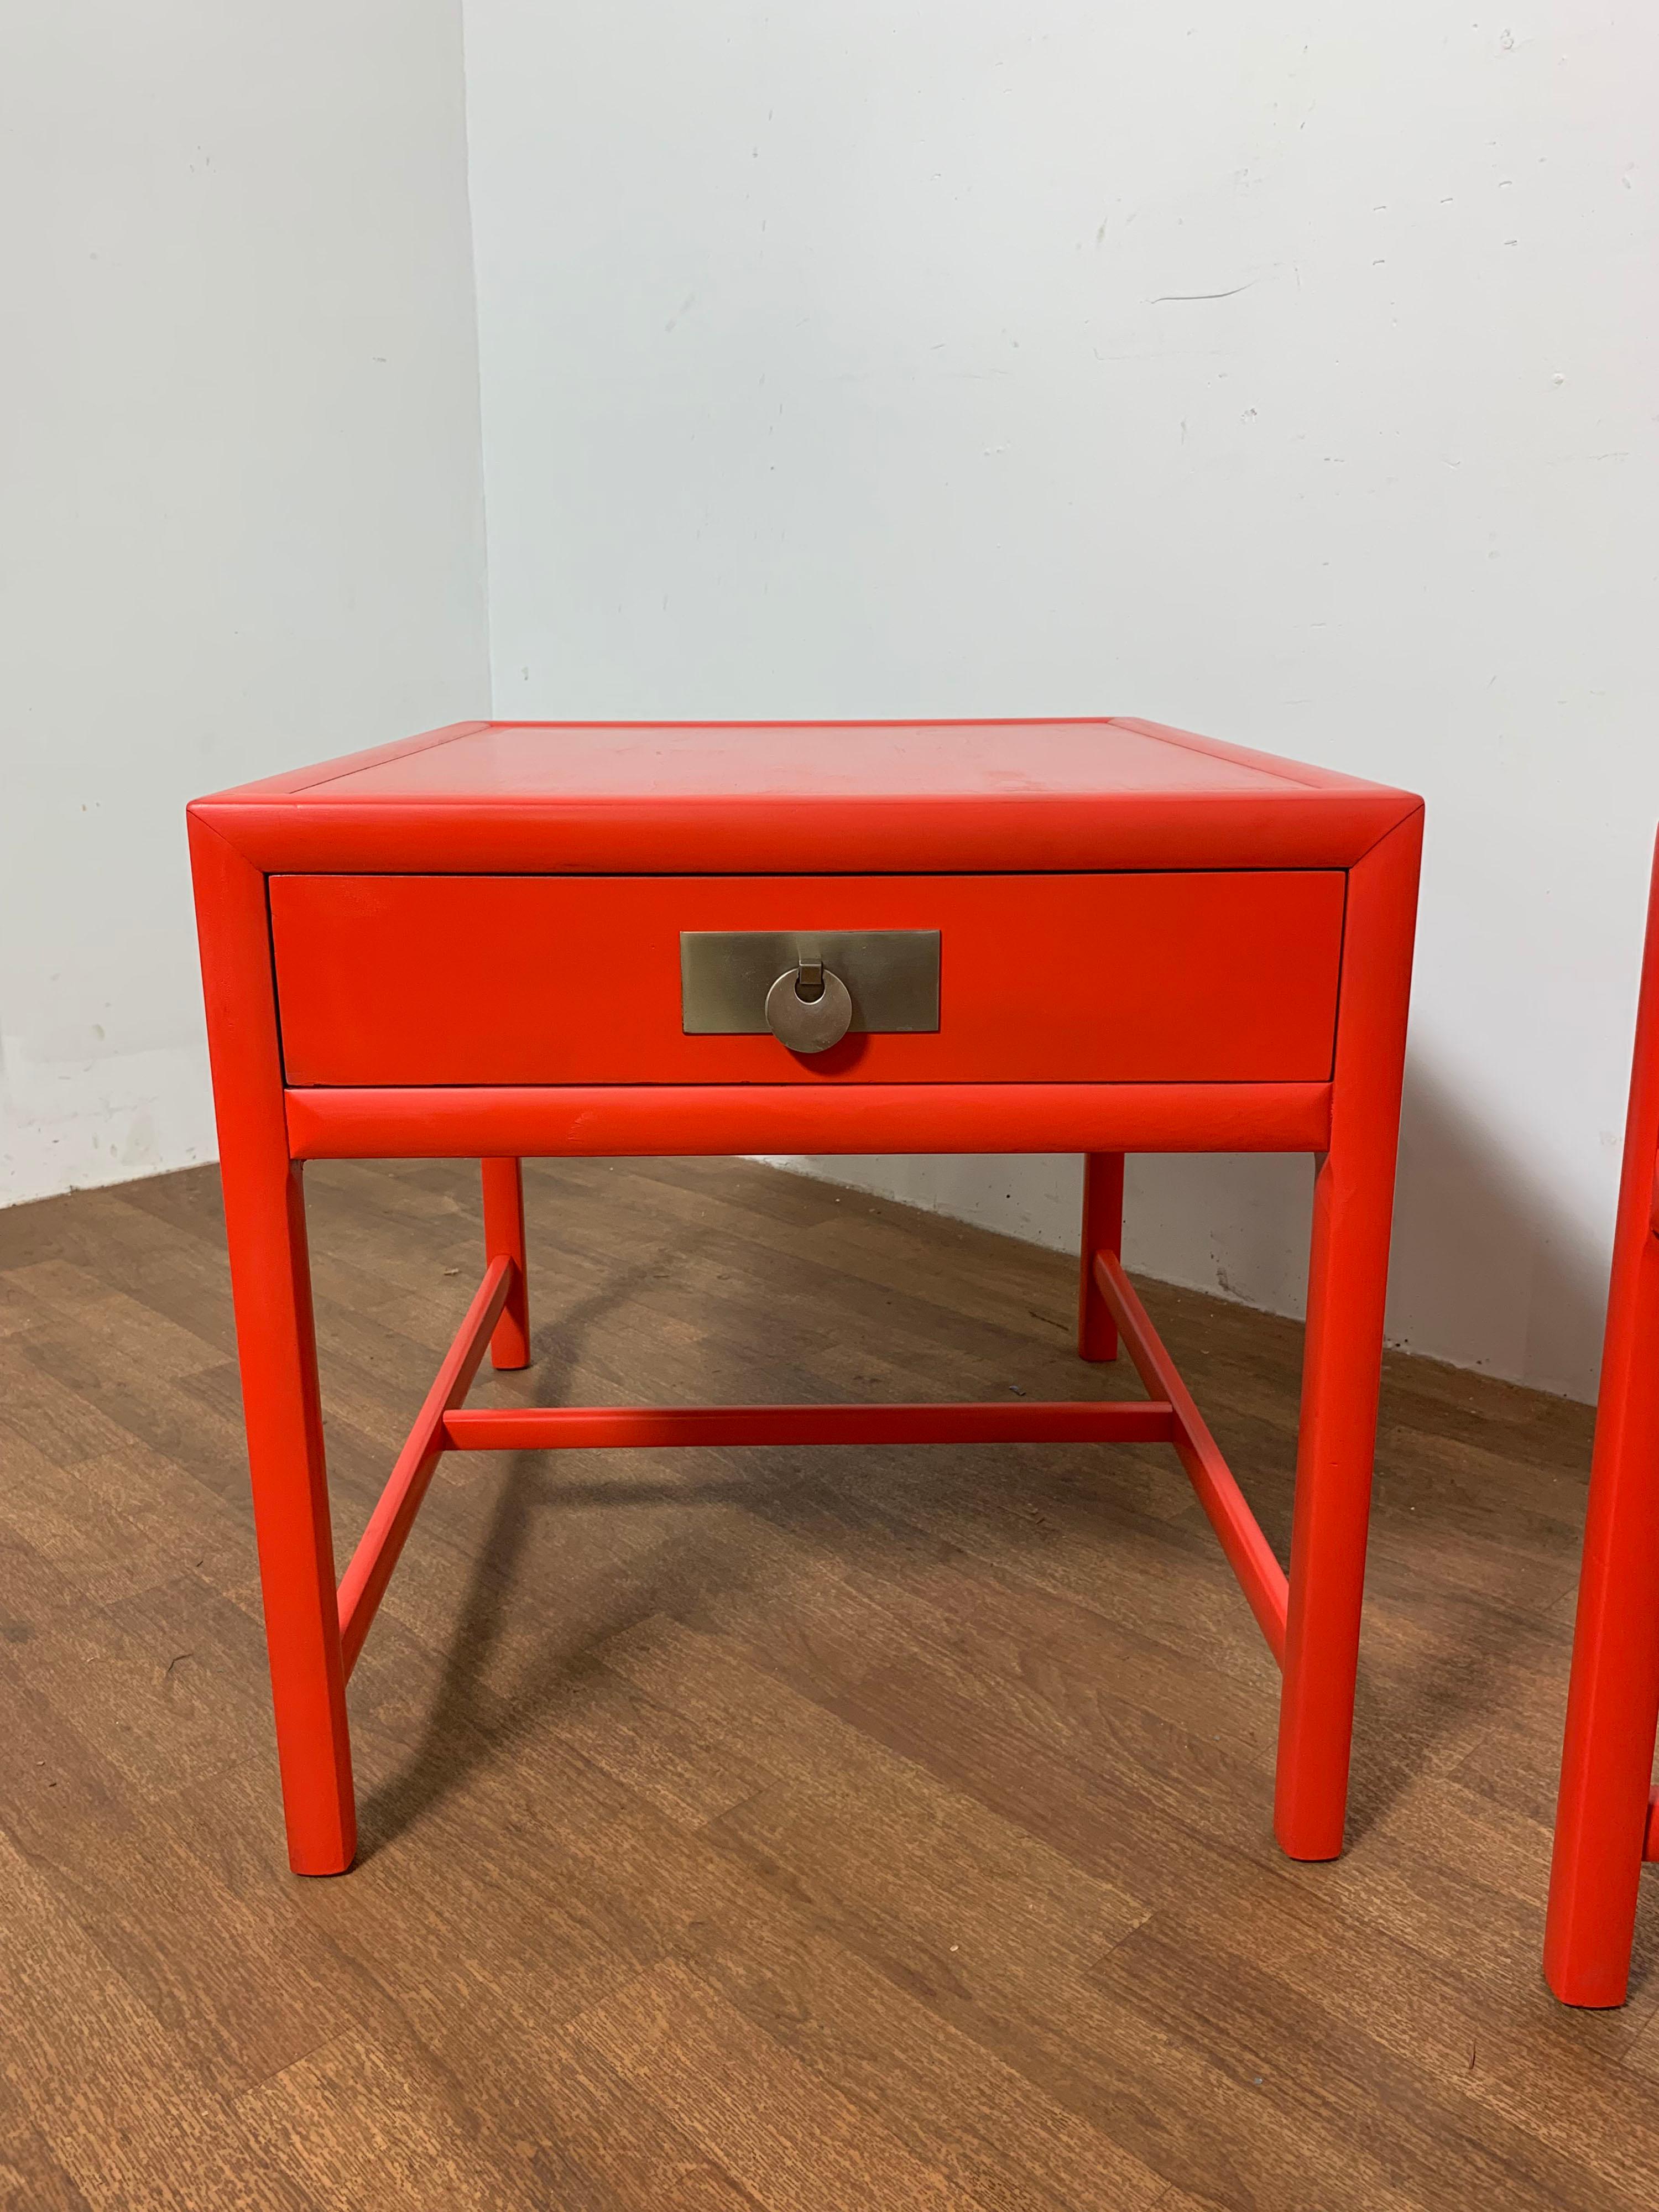 A pair of side tables by Michael Taylor for Baker Furniture’s “New World” collection, circa 1950s. Lacquered in coral.